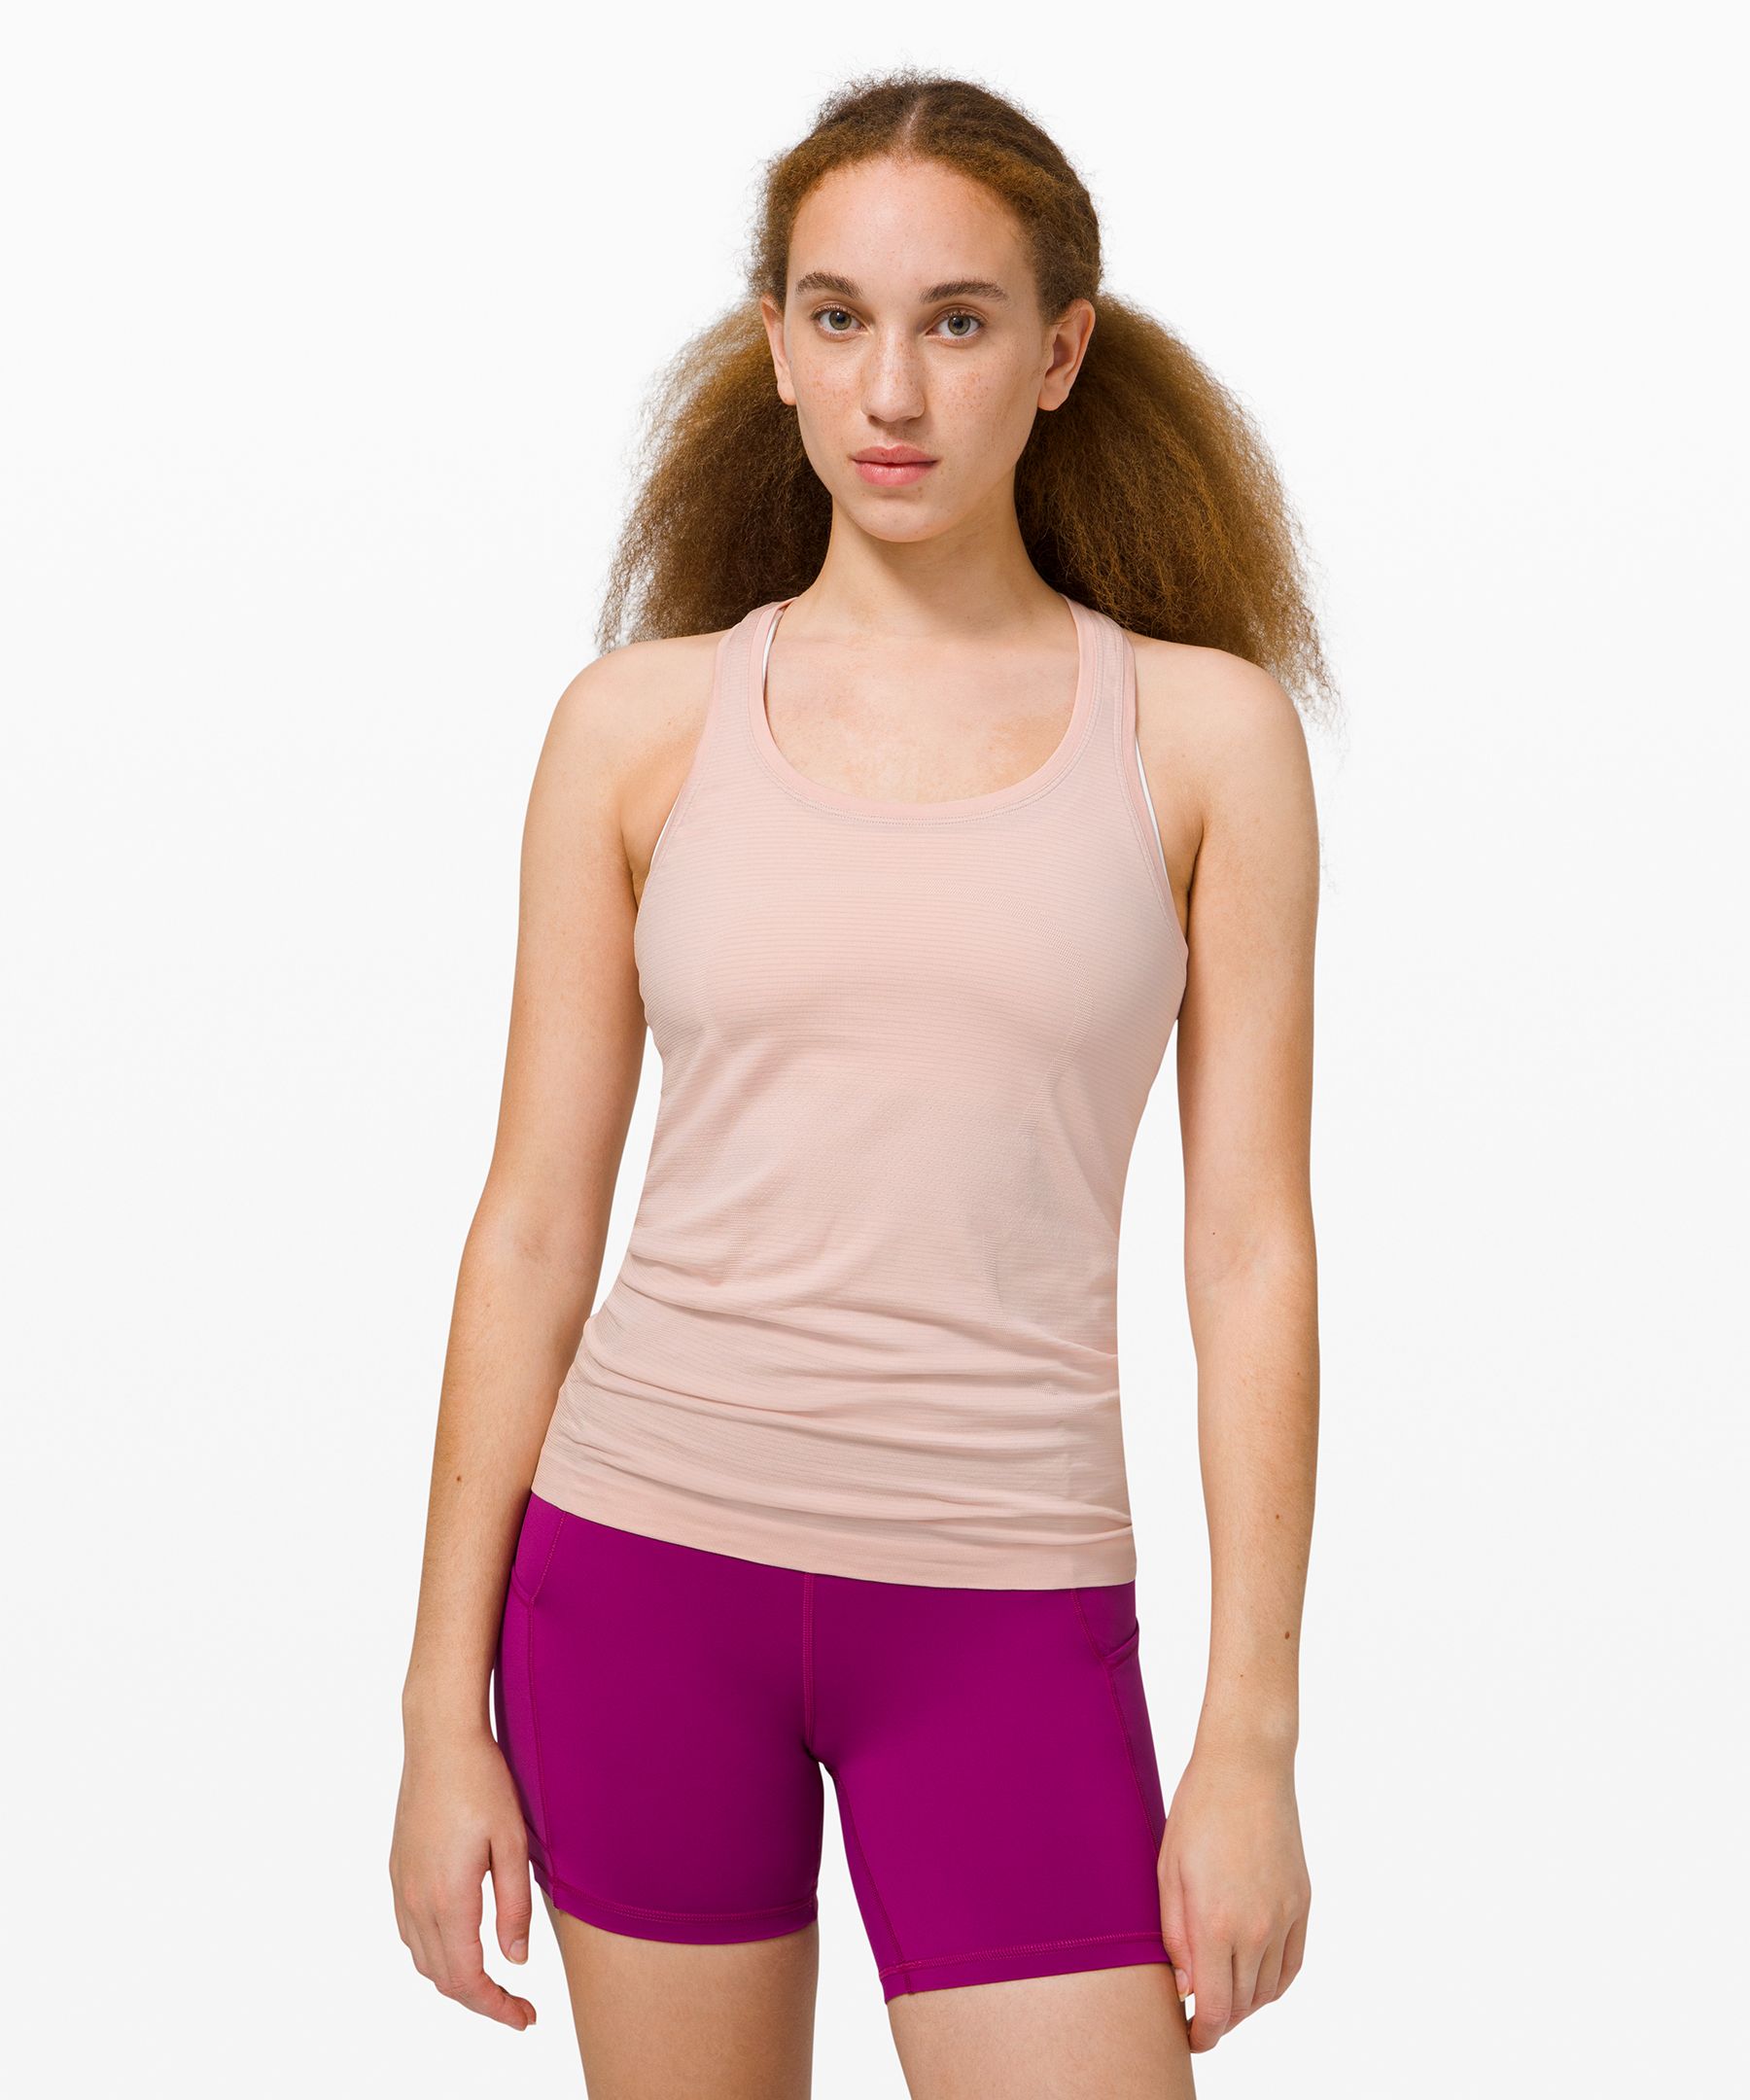 Lululemon Swiftly Tech Racerback Tank Top 2.0 In Feather Pink/feather Pink